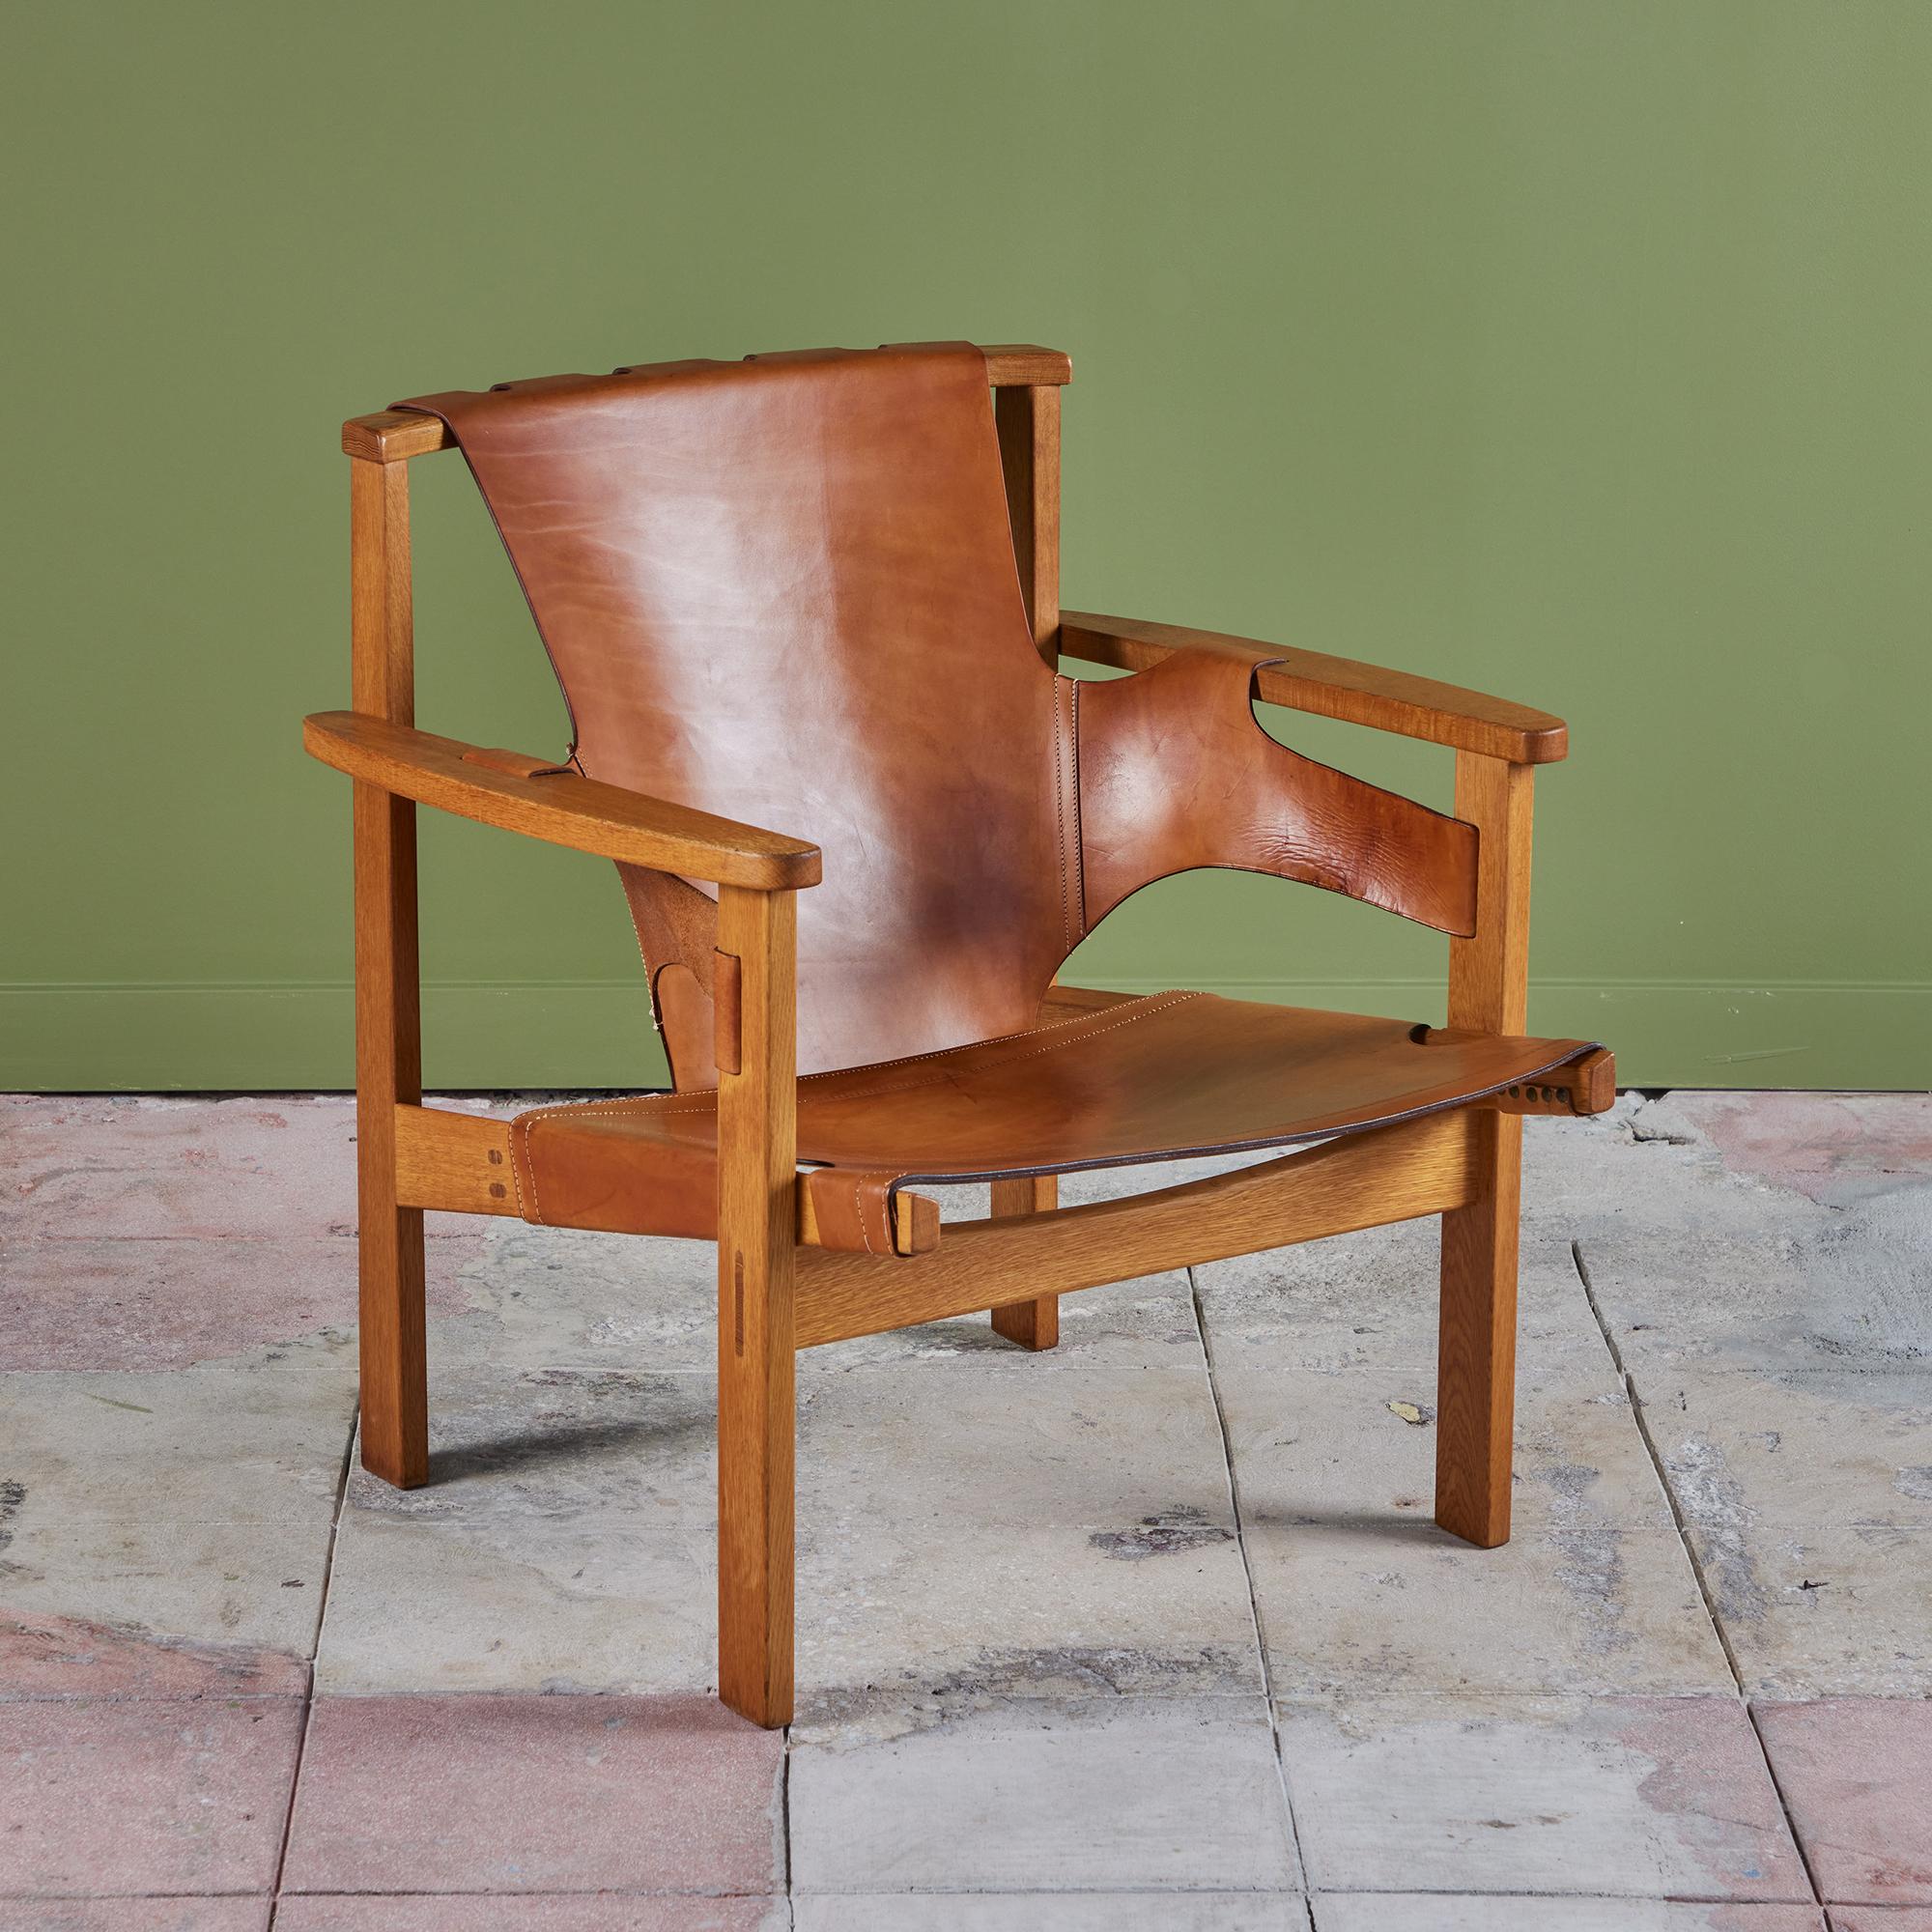 Lounge chair by Carl-Axel Acking for Nordiska Kompaniet, c.1950s, Sweden. The chair was first debuted at the Triennial exhibition in Milan, hence the chairs name. The cognac leather lounge chair is wrapped around an oak frame and finished with both